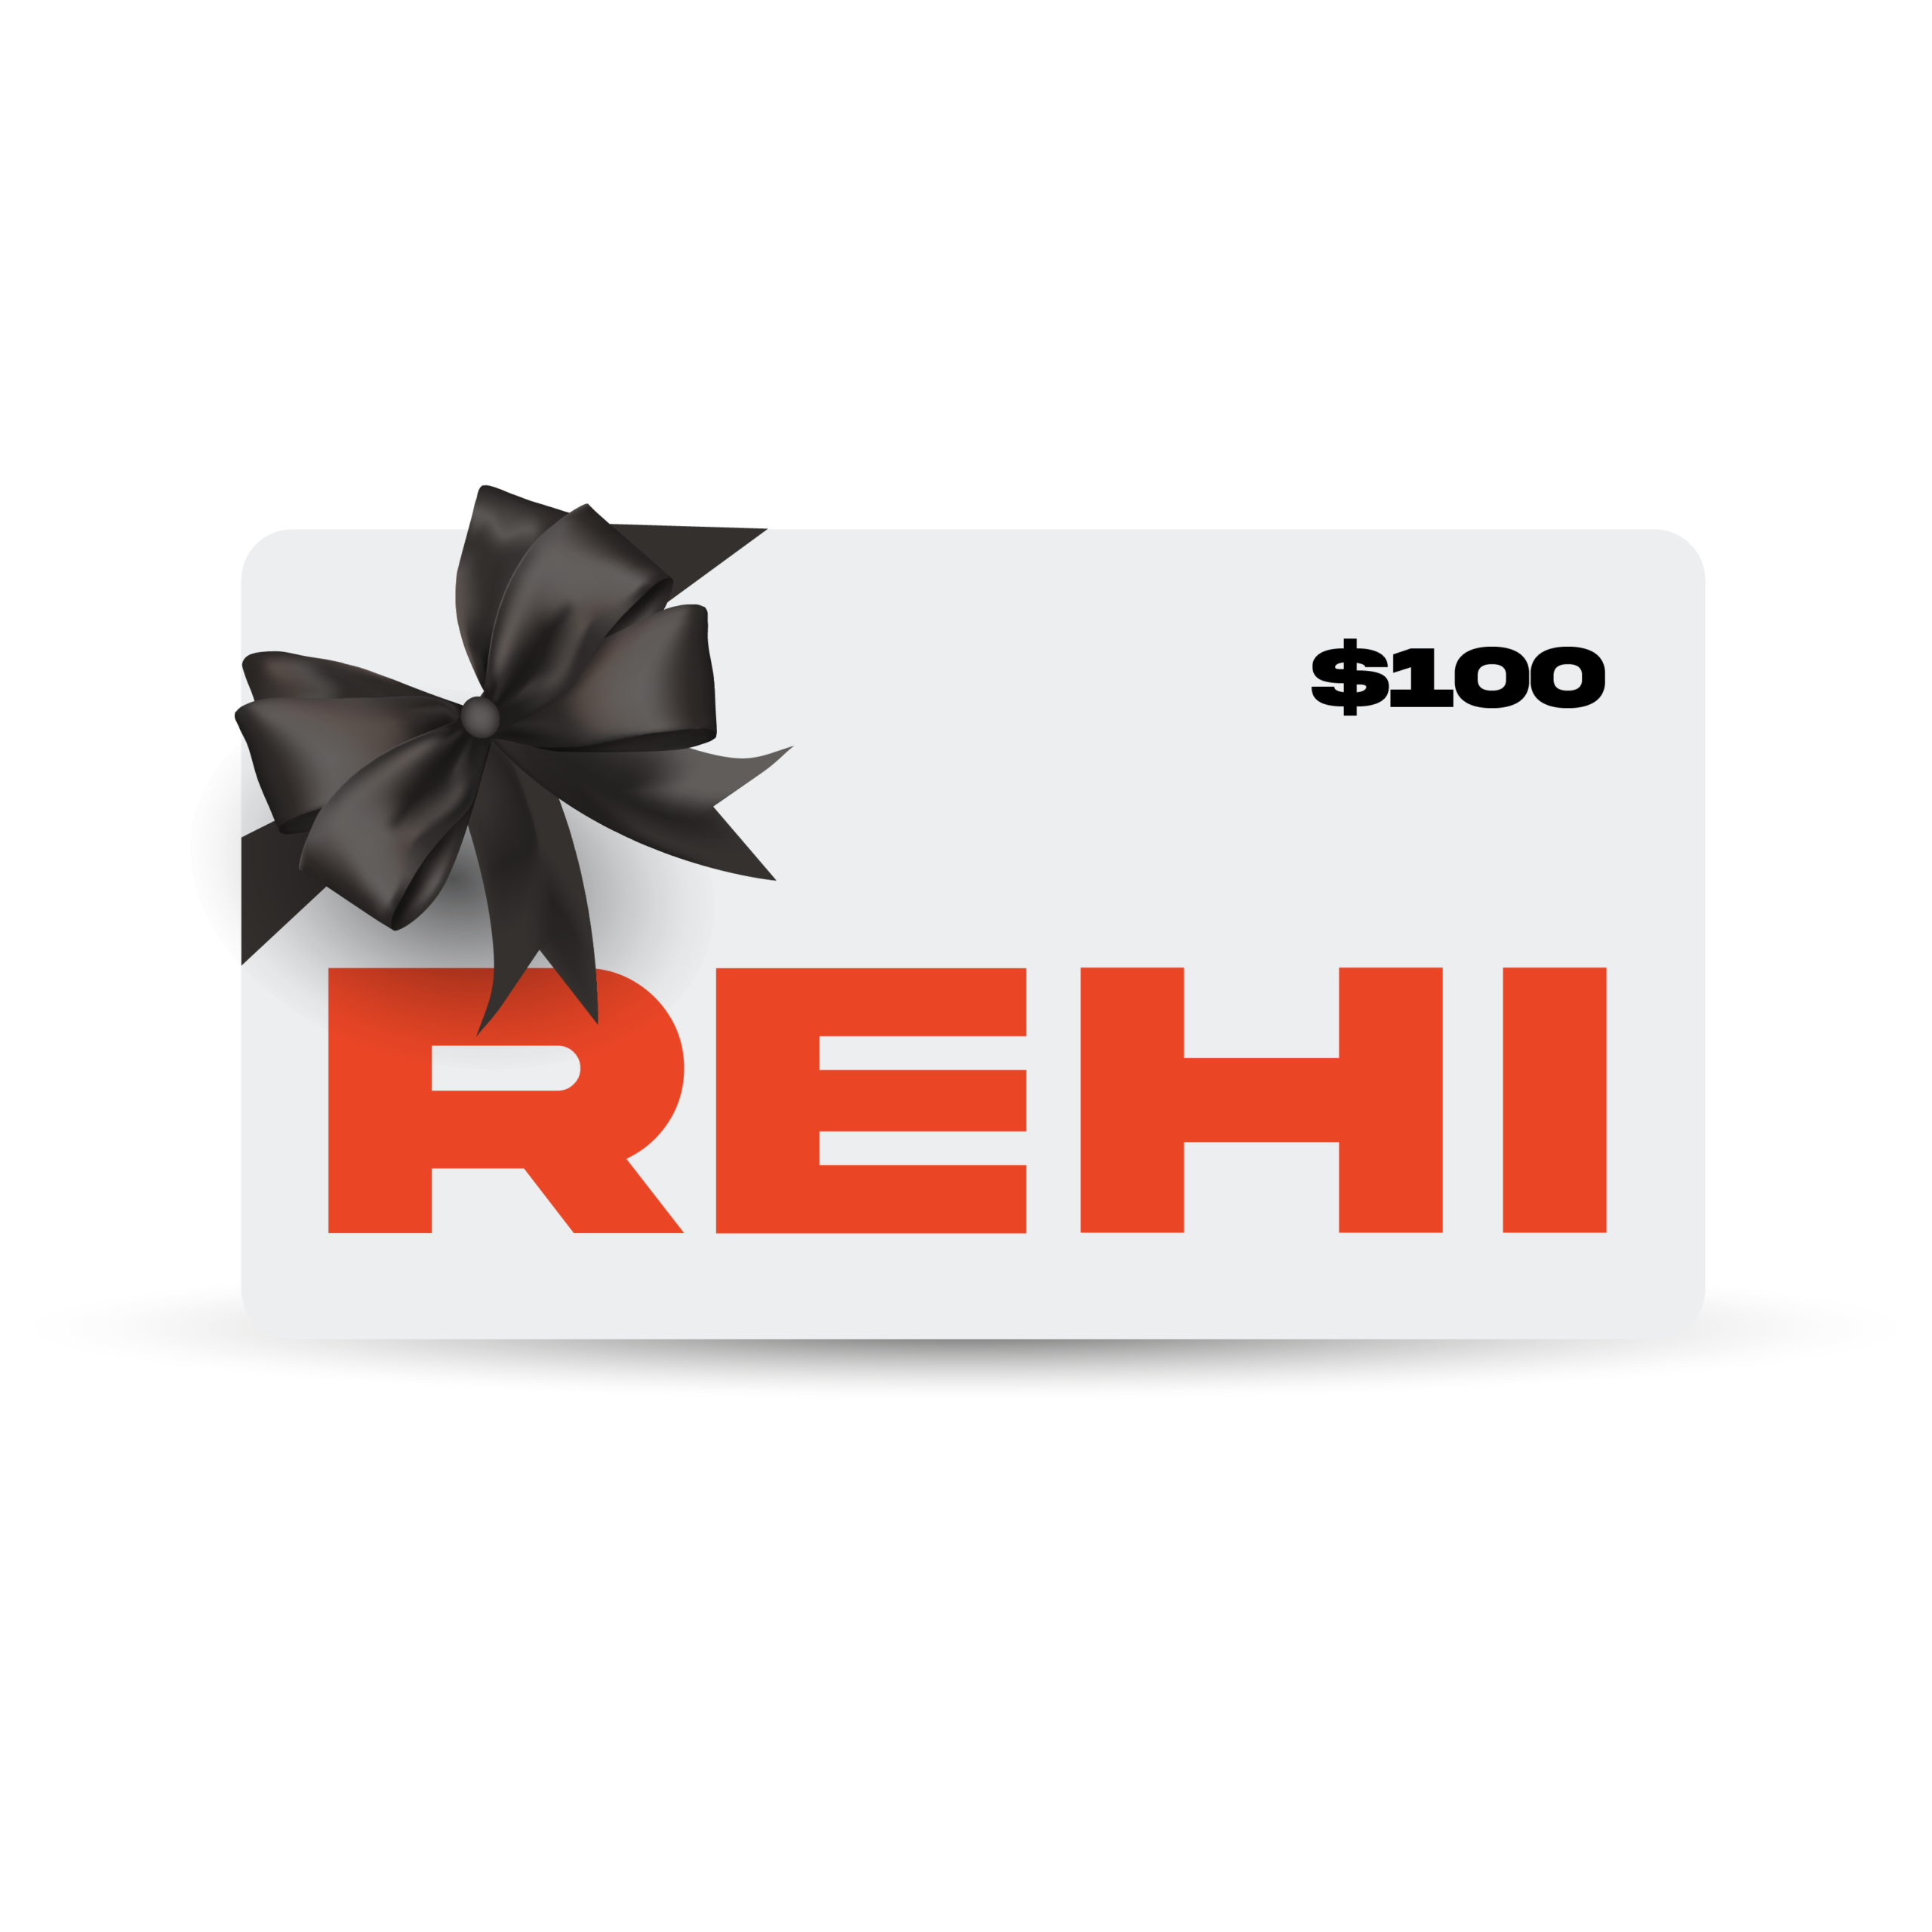 attribute_gift-card-amount: $100